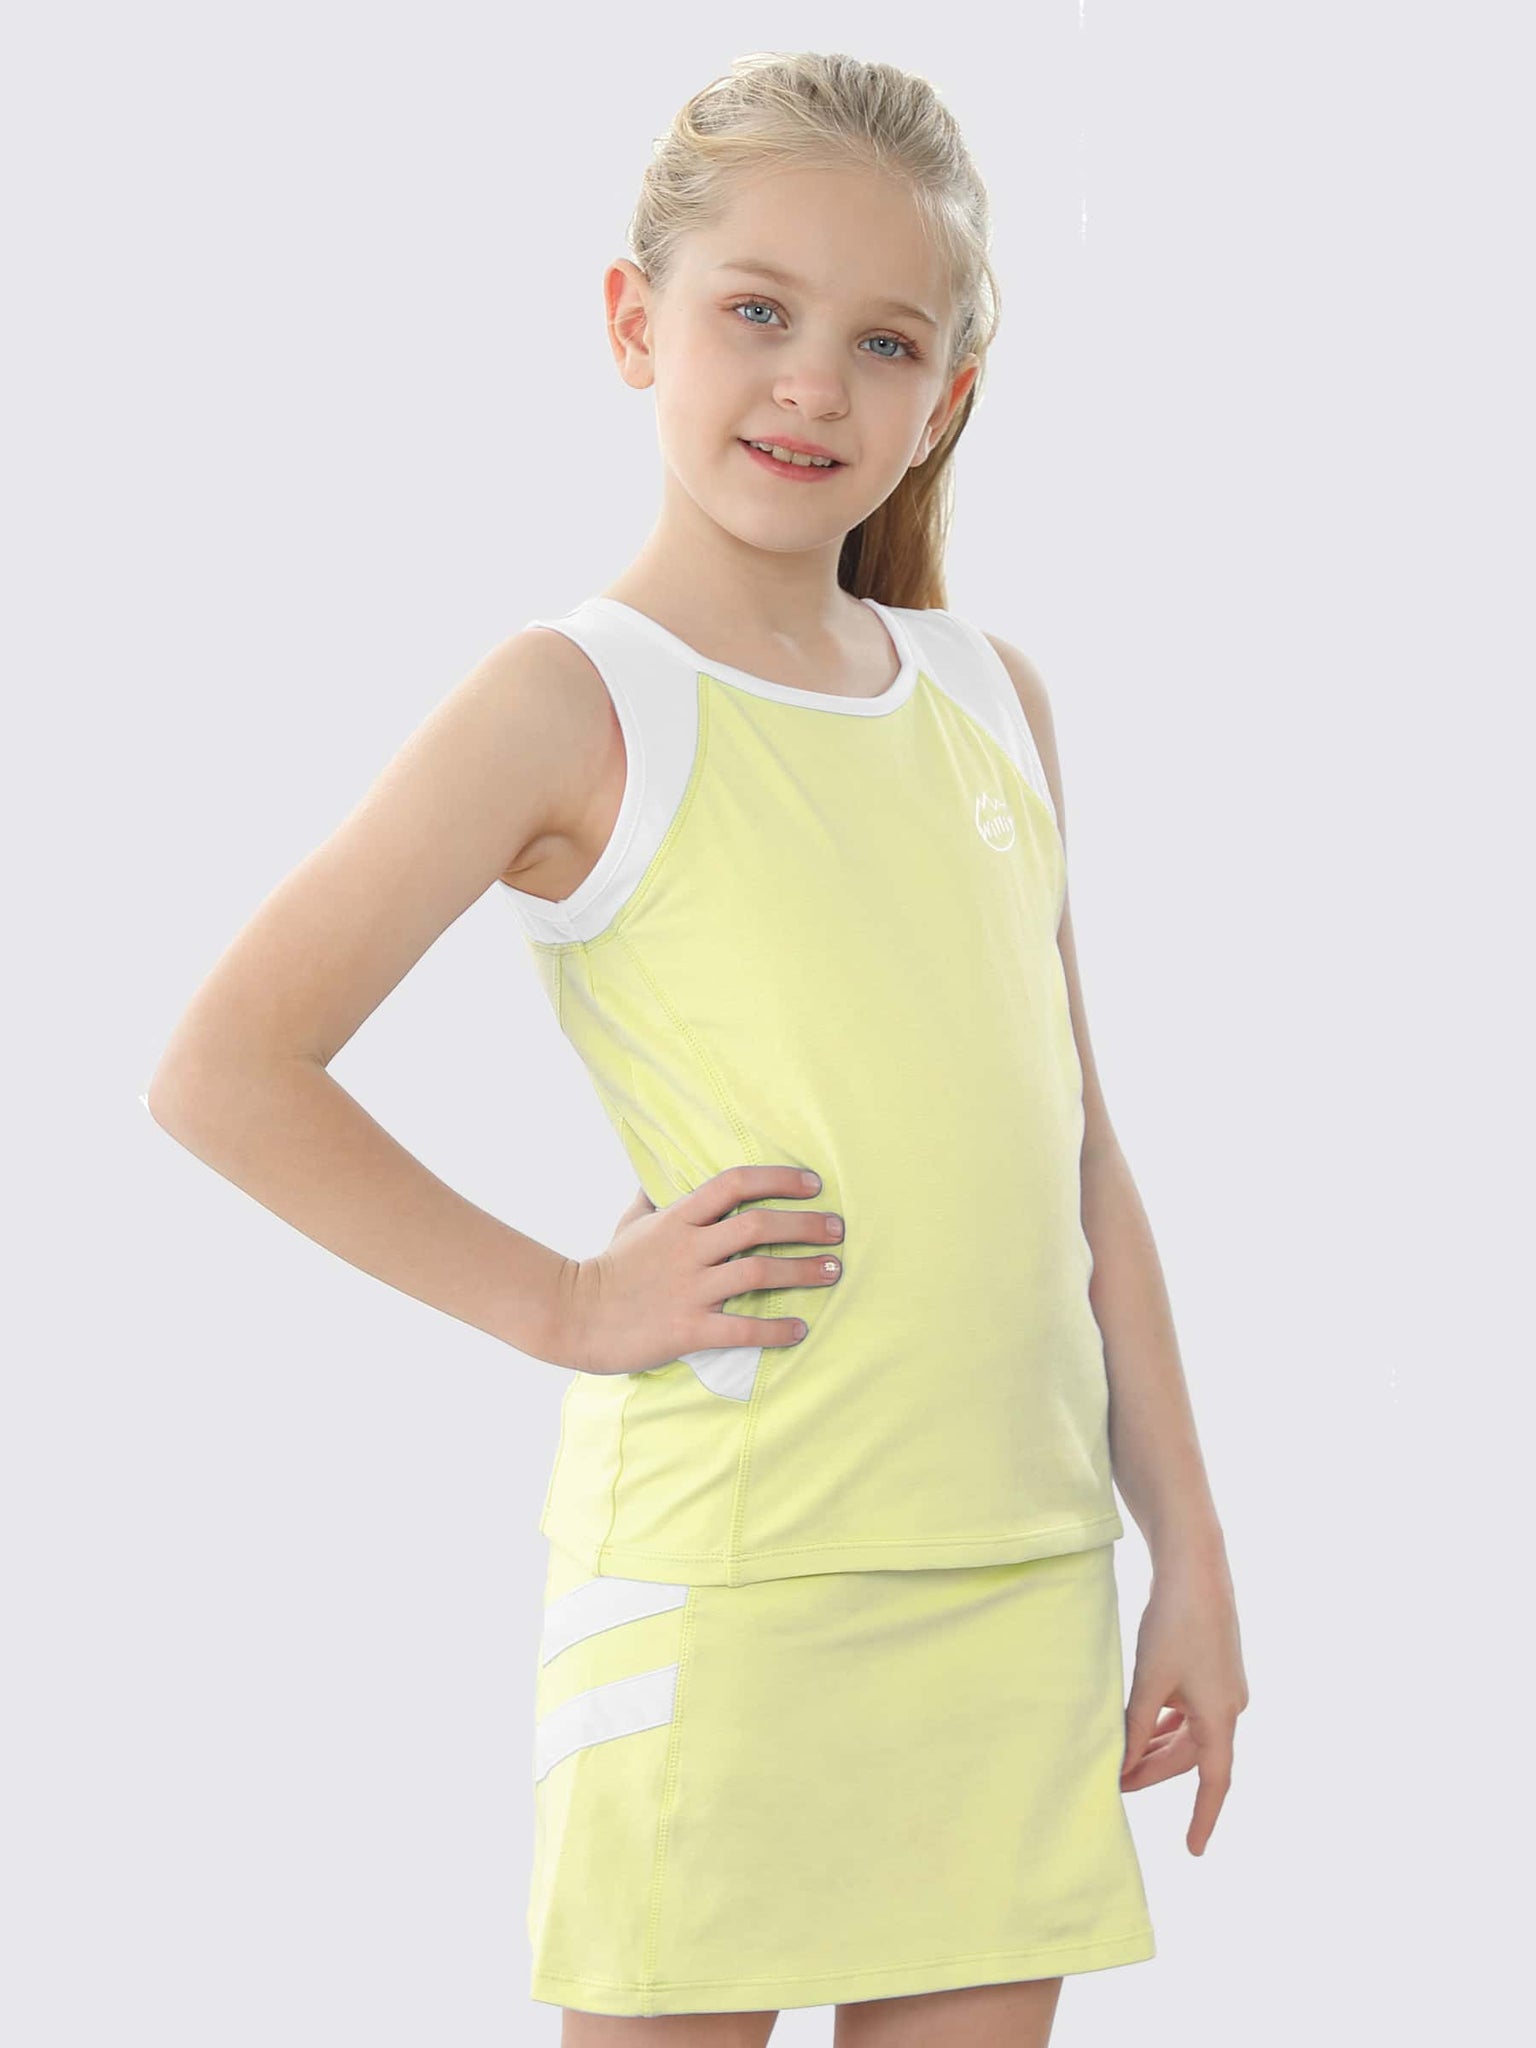 Willit Girls' Tennis Outfit_Yellow_model3